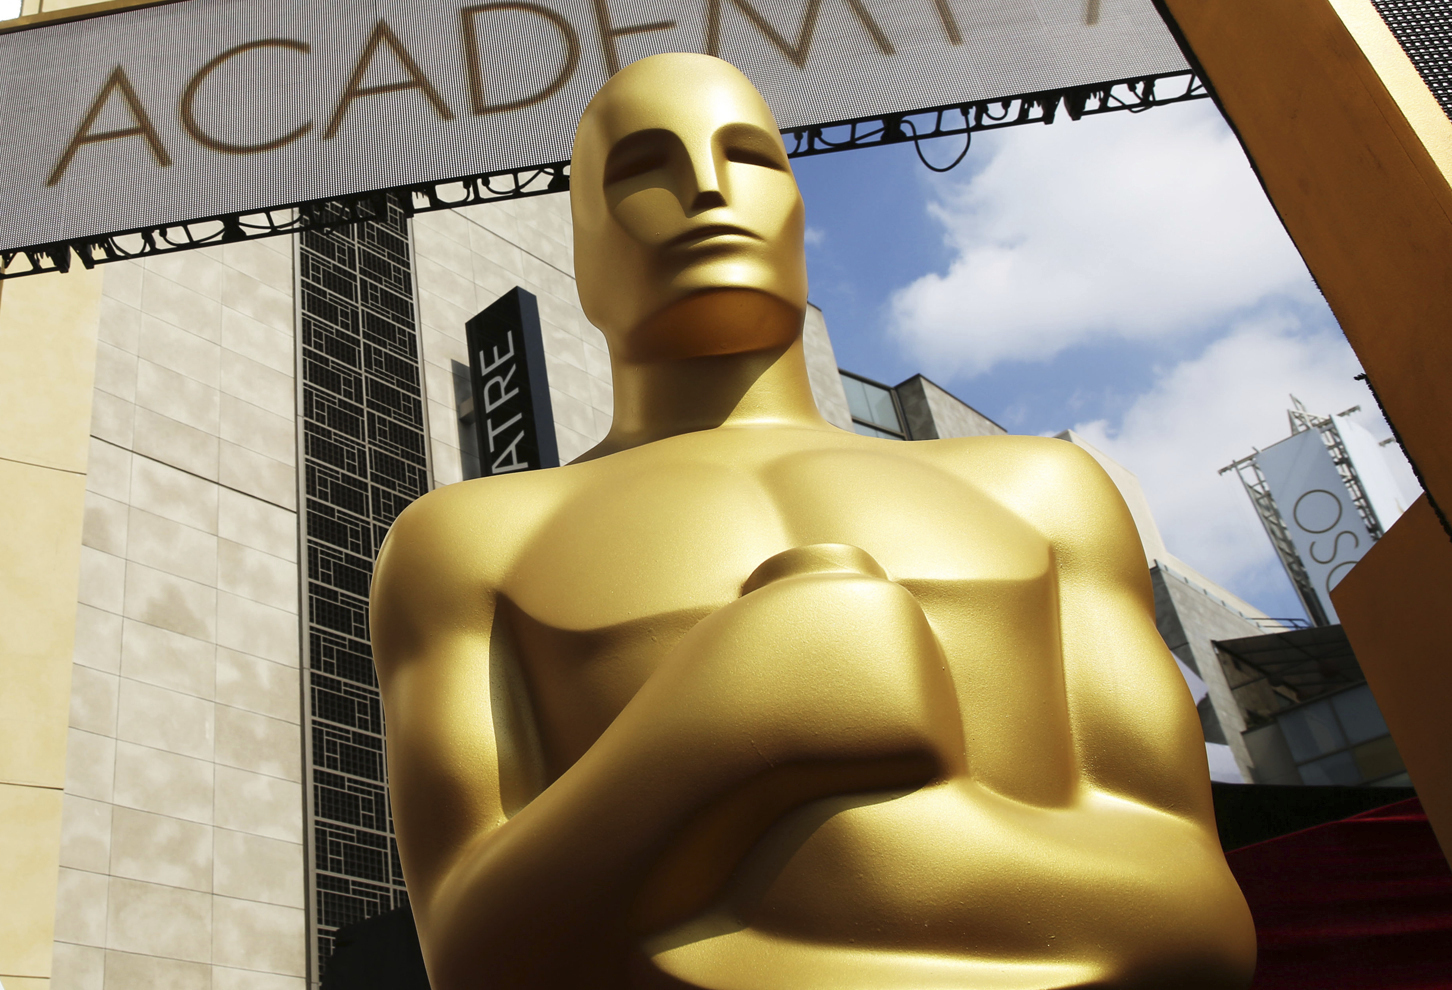 FILE - In this Feb. 21, 2015 file photo, an Oscar statue appears outside the Dolby Theatre for the 87th Academy Awards in Los Angeles. The 93rd Oscars will be held on April 25. (Photo by Matt Sayles/Invision/AP, File)